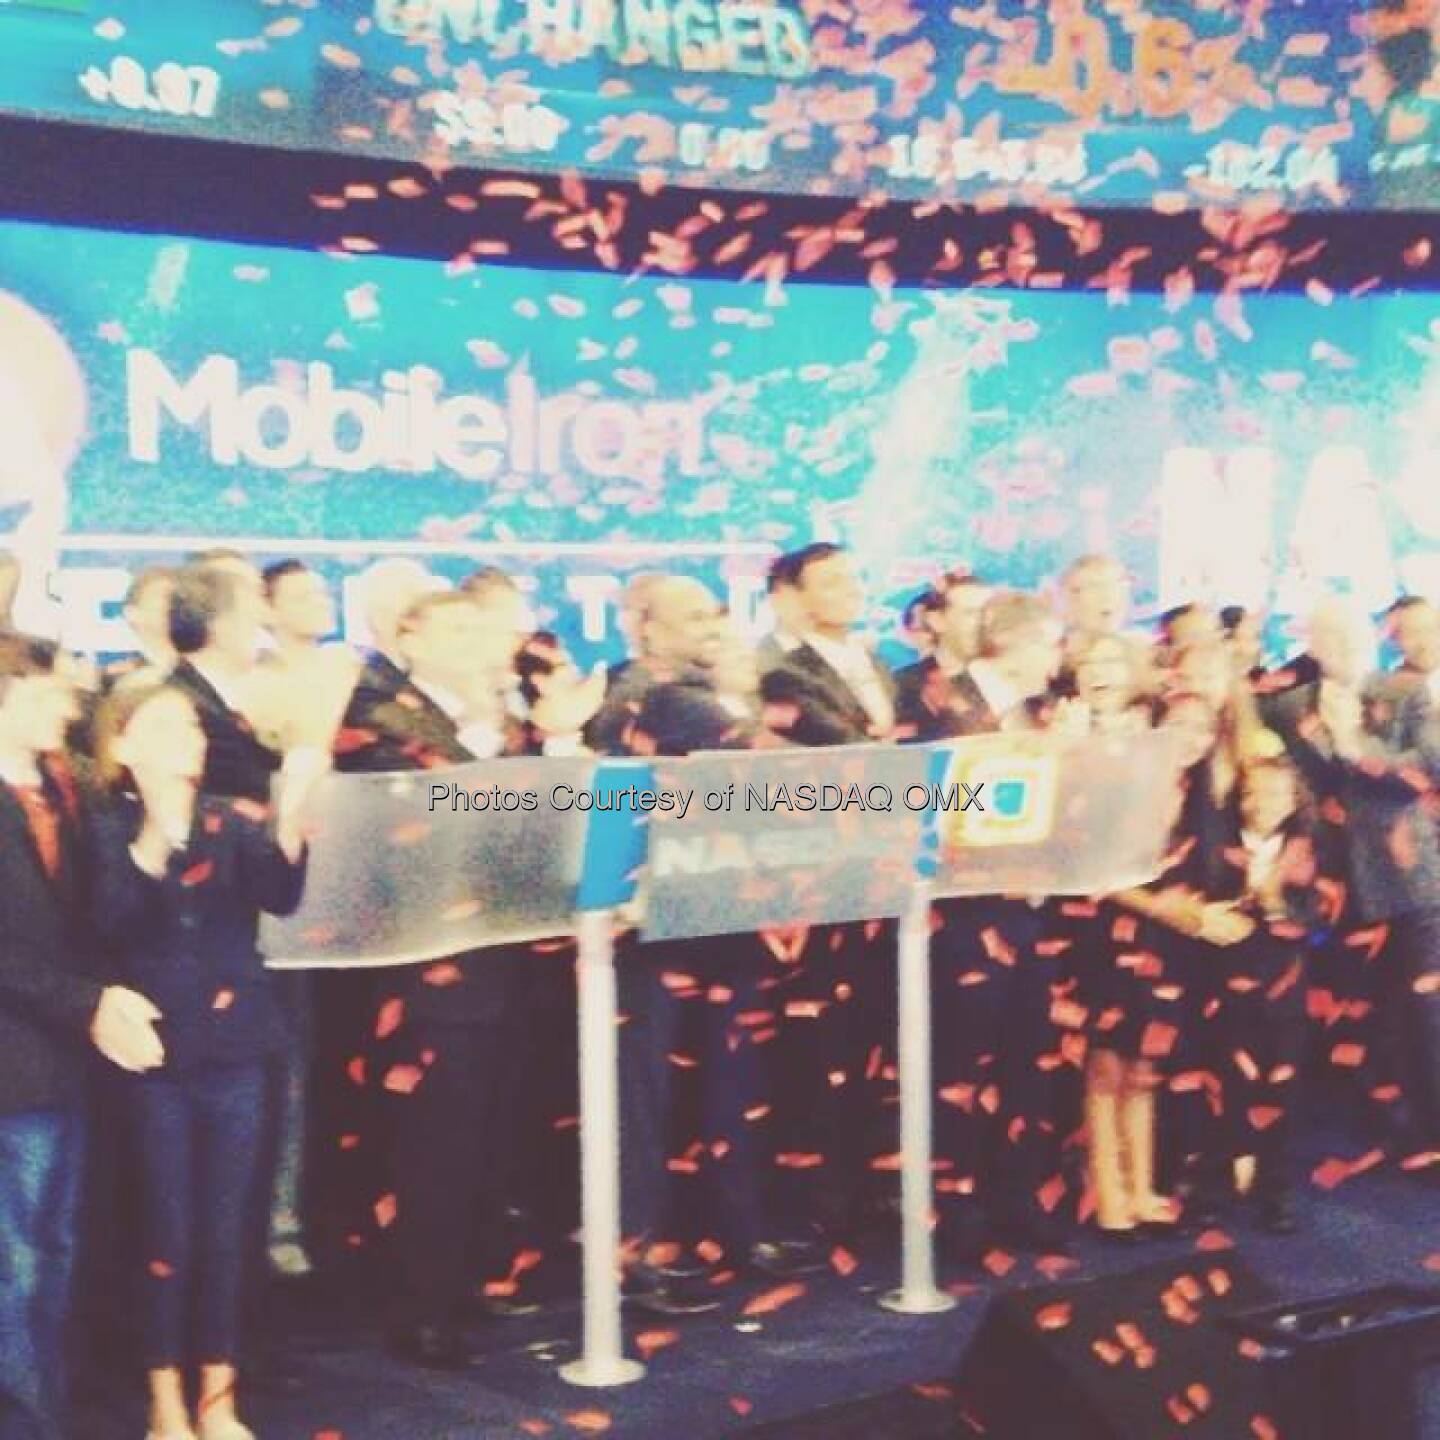 Confetti flies shortly after MobileIron rings the Nasdaq Opening Bell in celebration of IPO. $MOBL  Source: http://facebook.com/NASDAQ